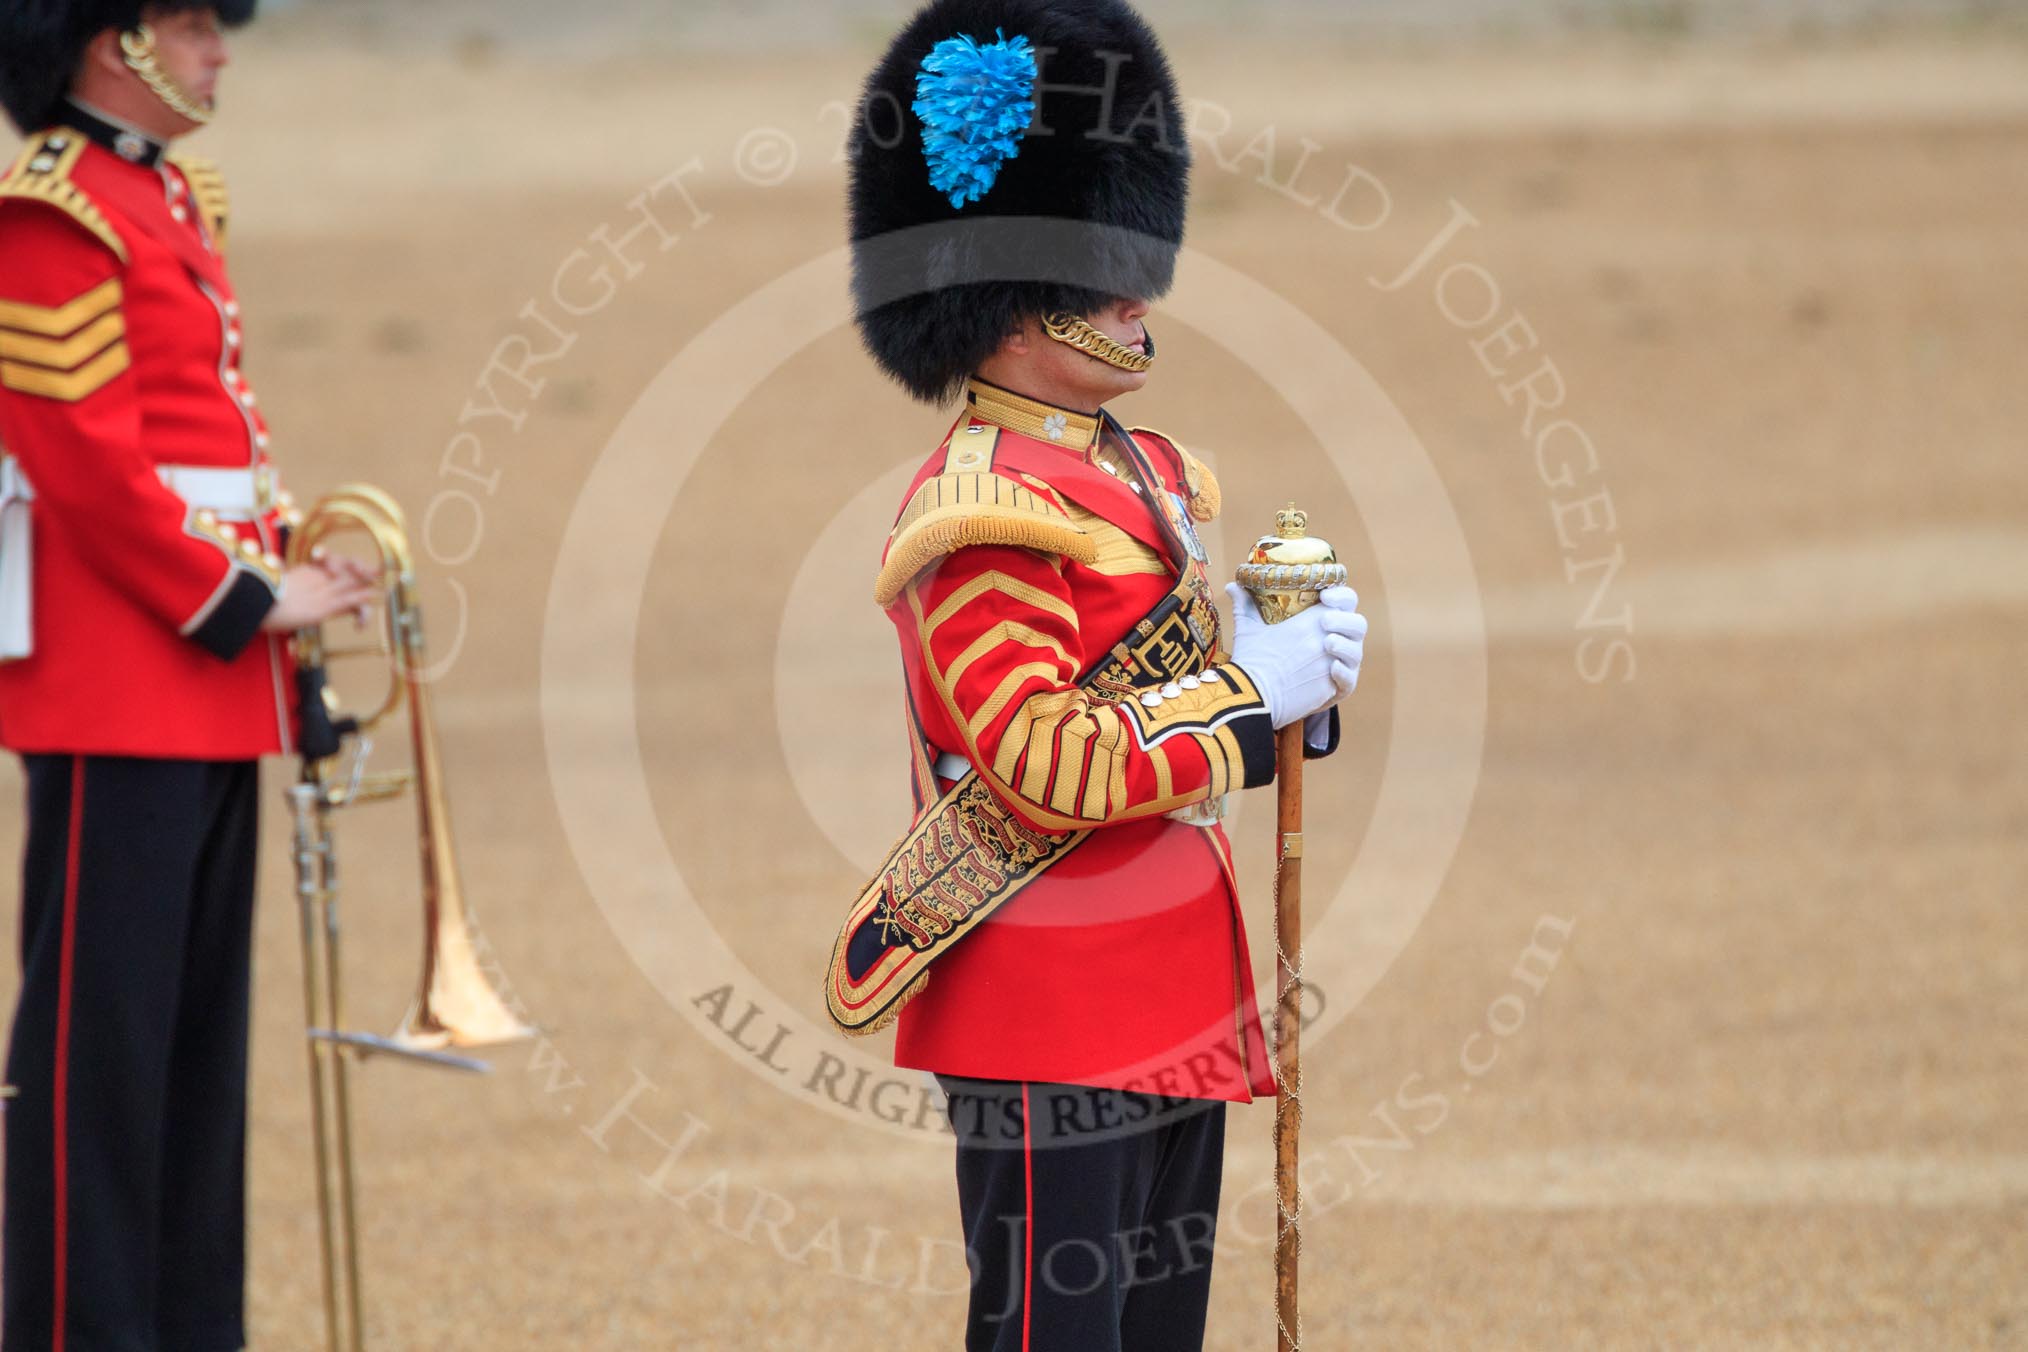 during The Colonel's Review {iptcyear4} (final rehearsal for Trooping the Colour, The Queen's Birthday Parade)  at Horse Guards Parade, Westminster, London, 2 June 2018, 10:35.